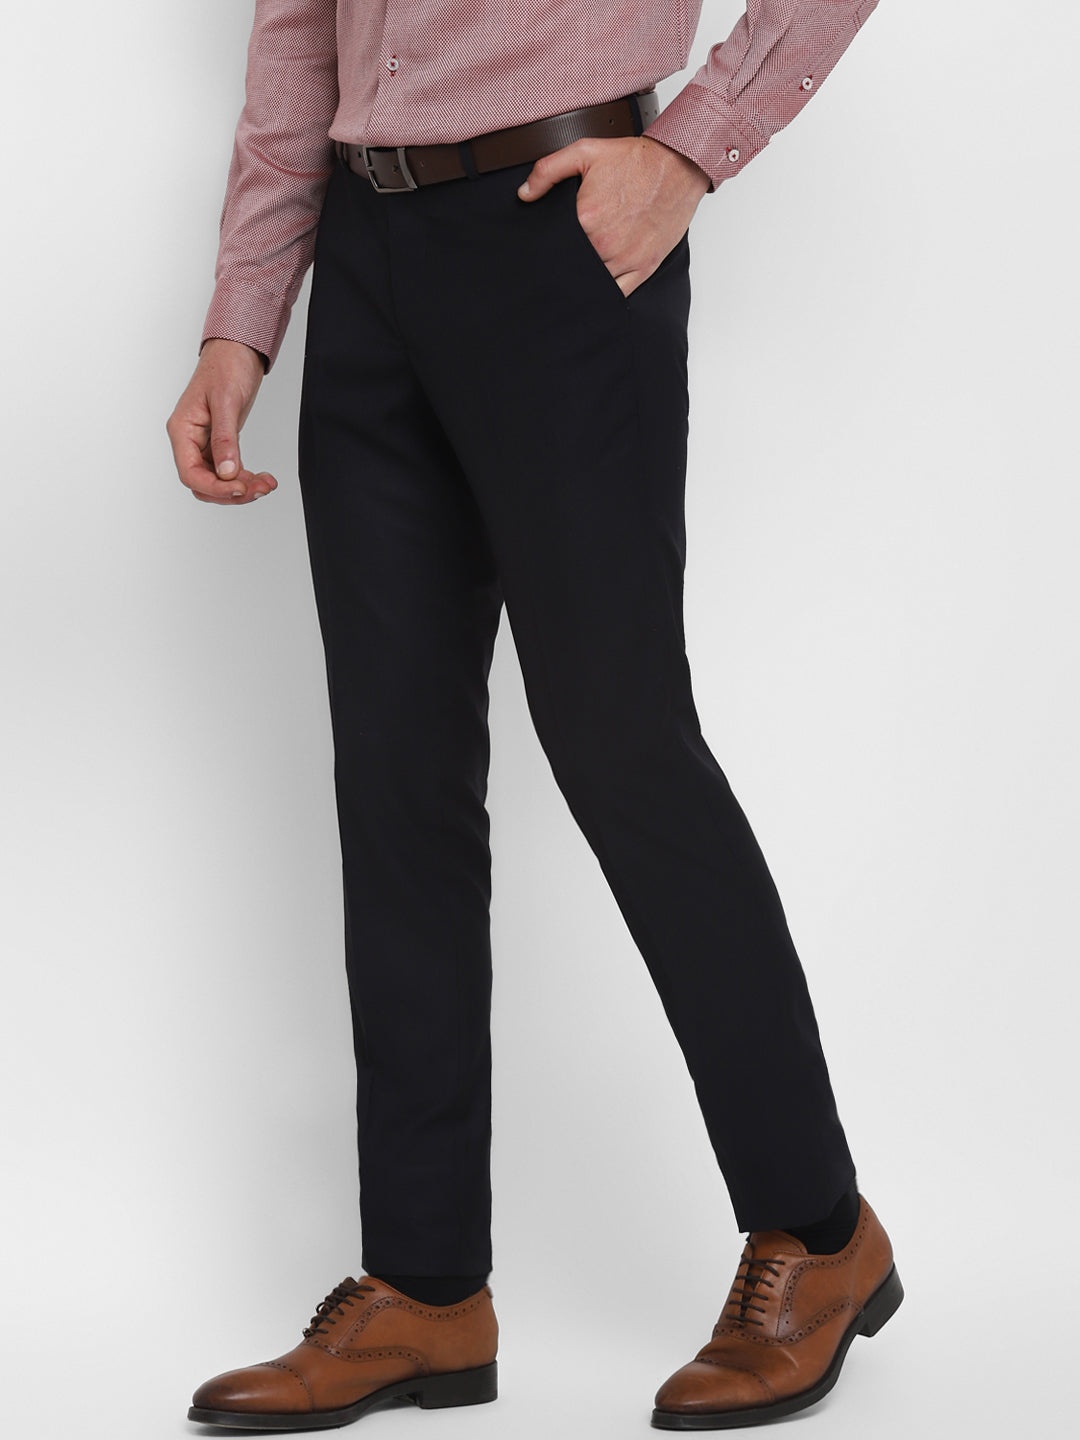 Navy Blue Solid Slim Fit Trouser